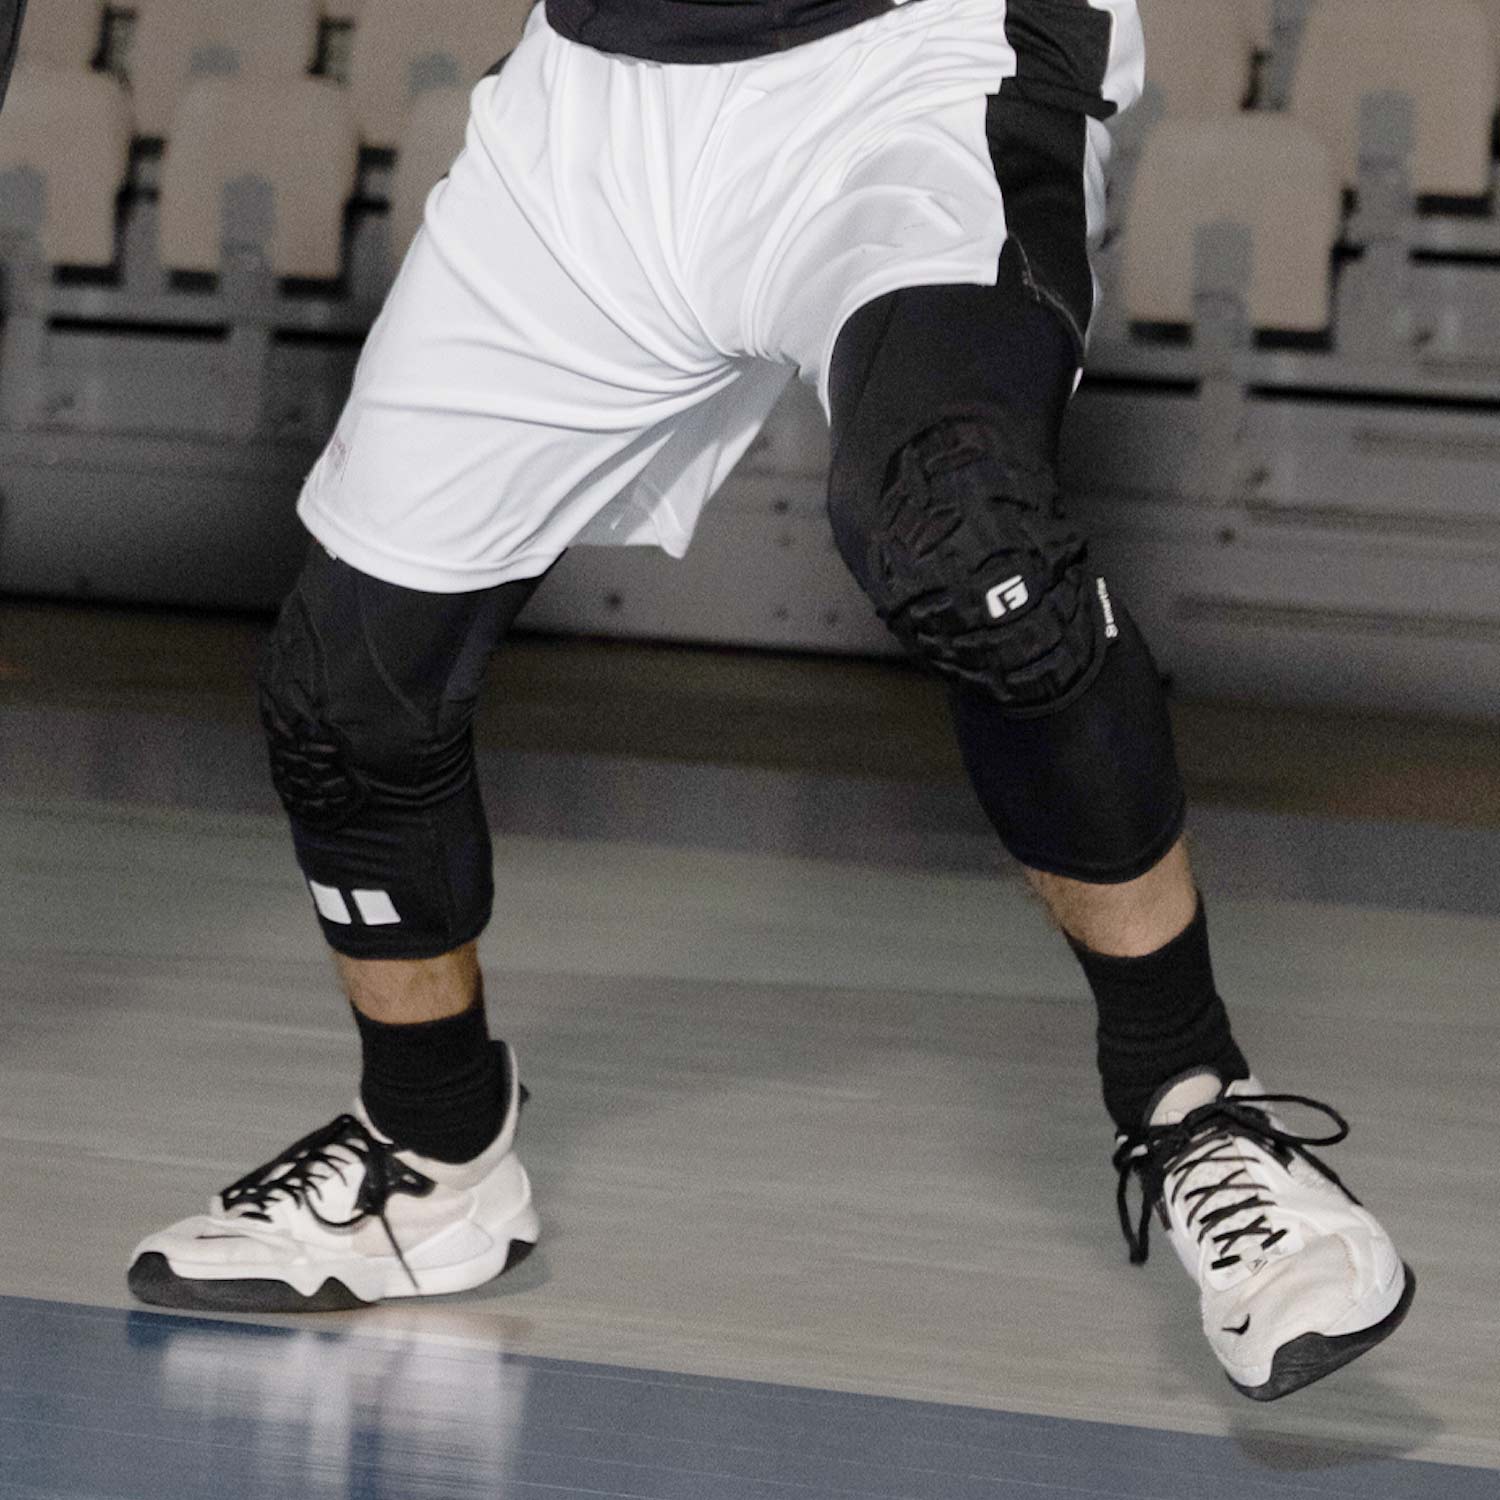 COOLOMG Boys 3/4 Basketball Compression Pants with Knee Pads